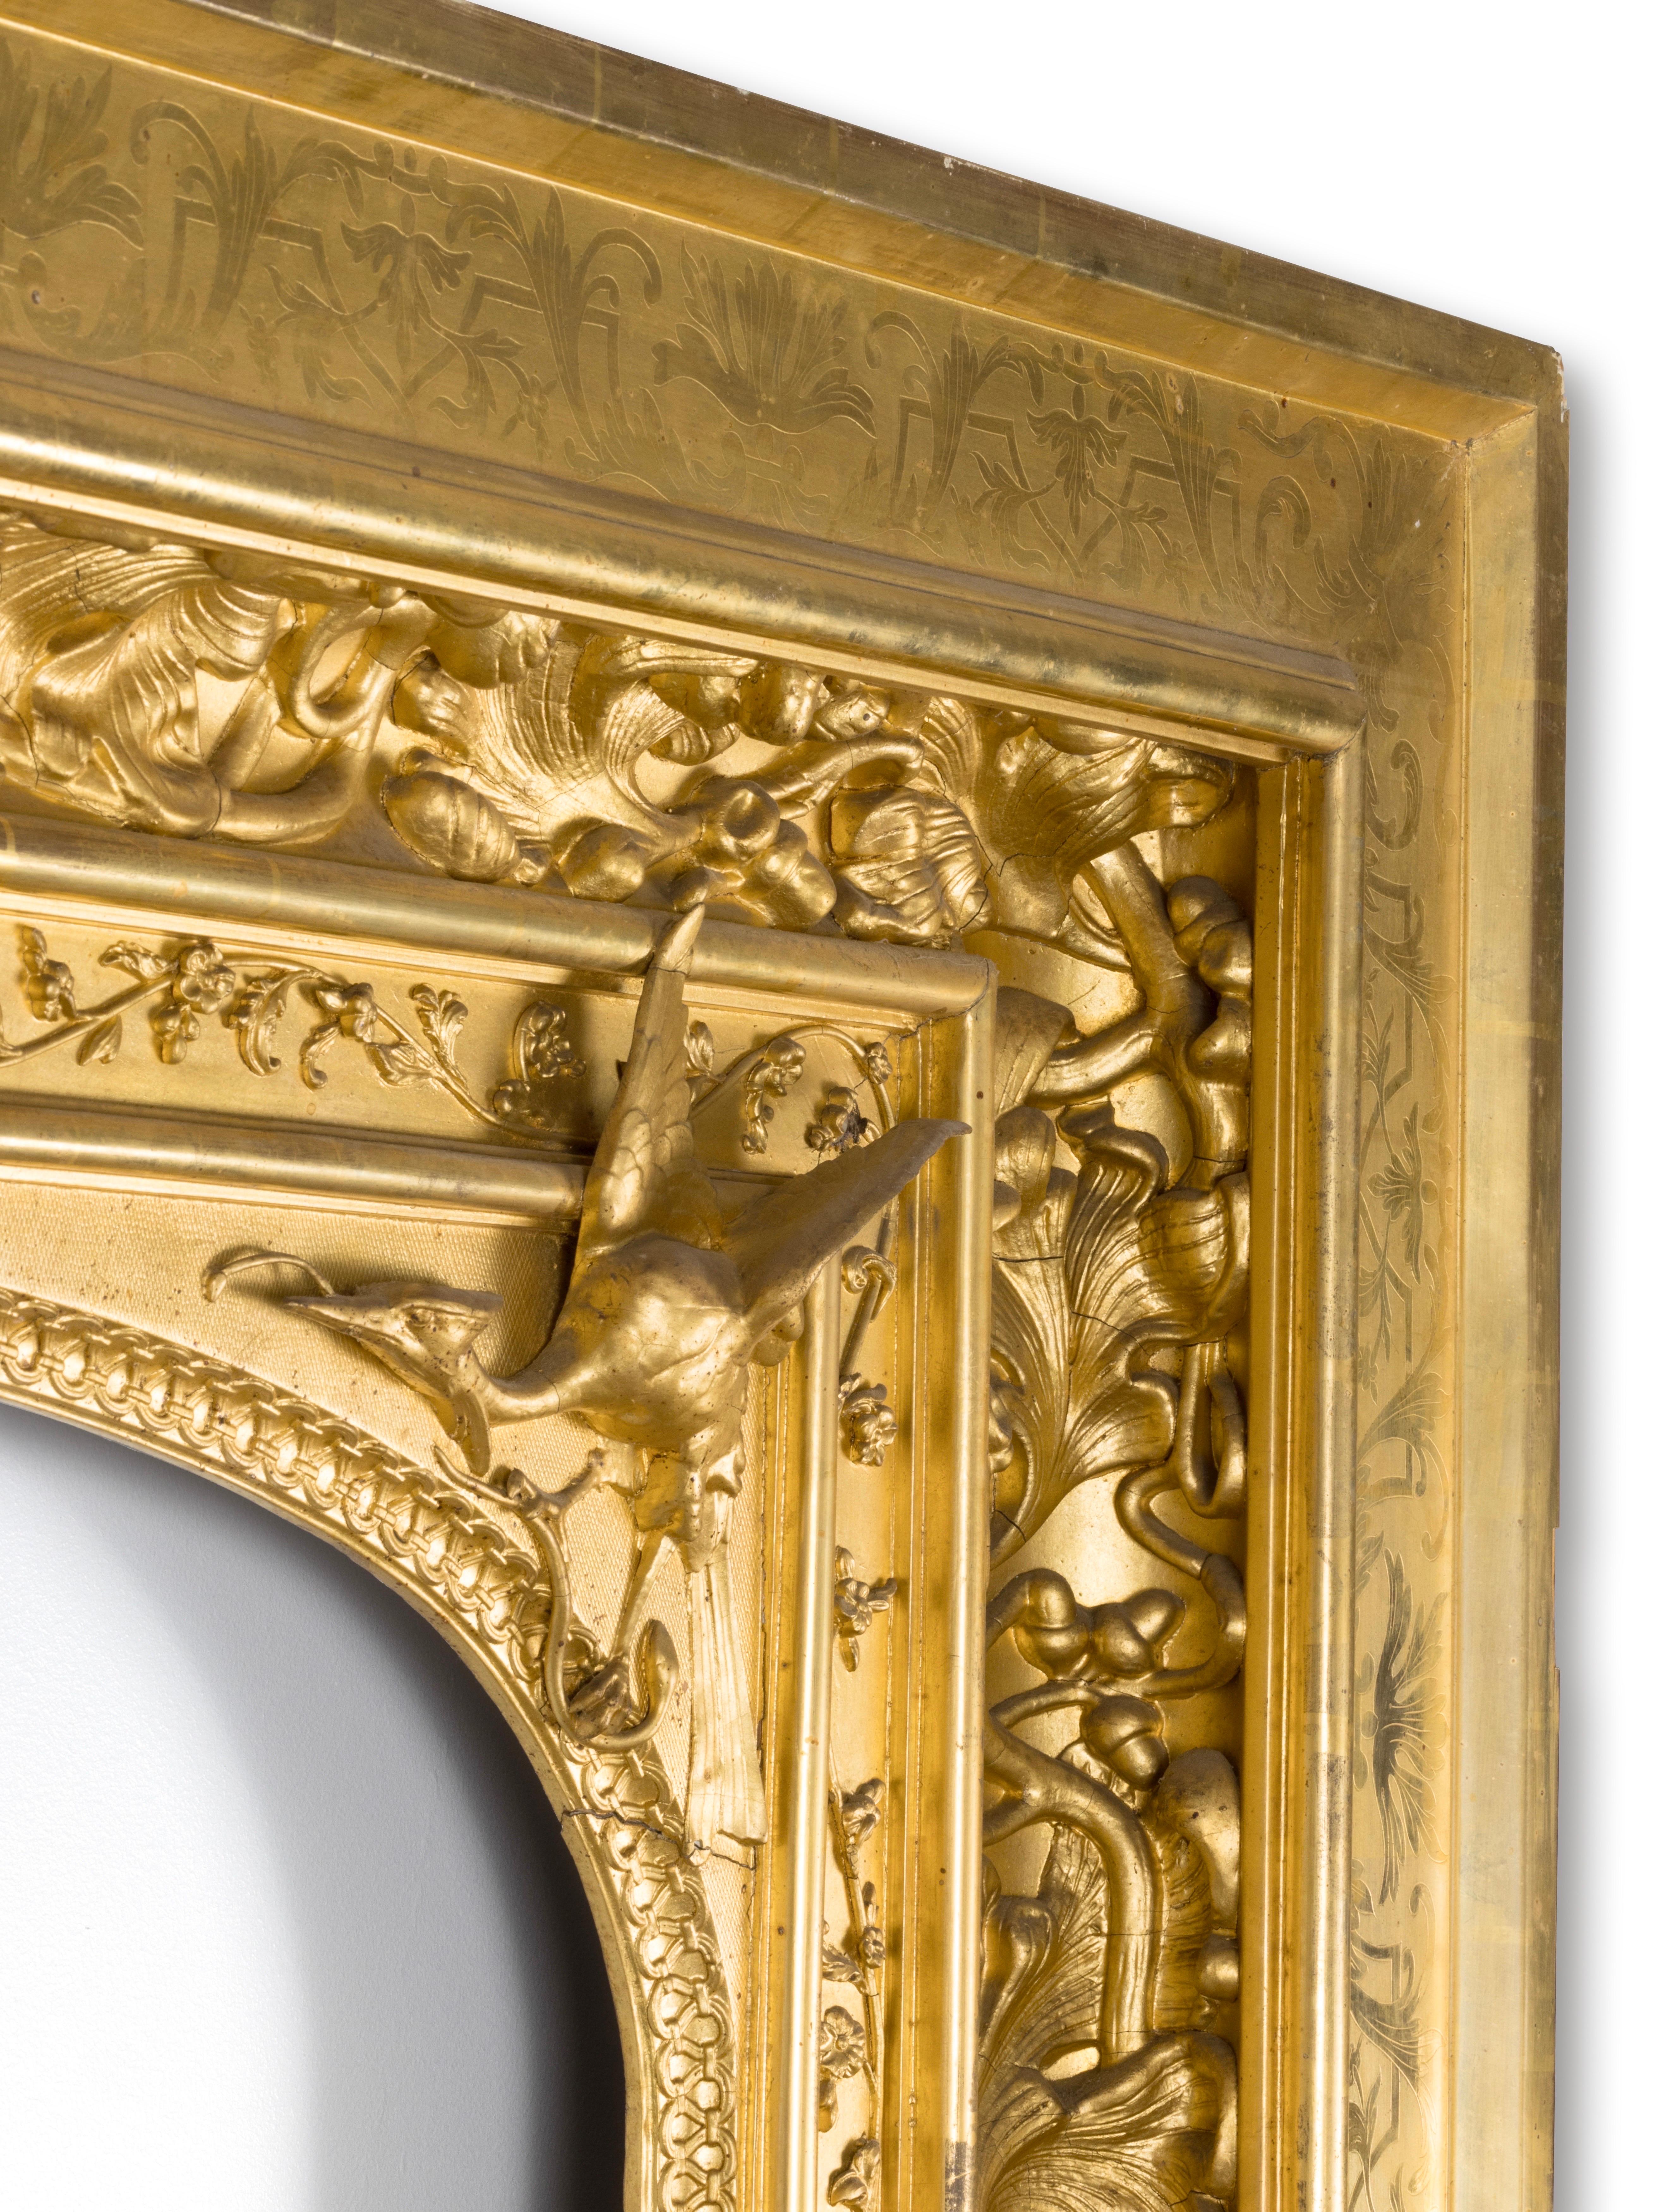 Very Large Renaissance Revival Gilded French Frame 19th Century, Circa 1835 For Sale 3